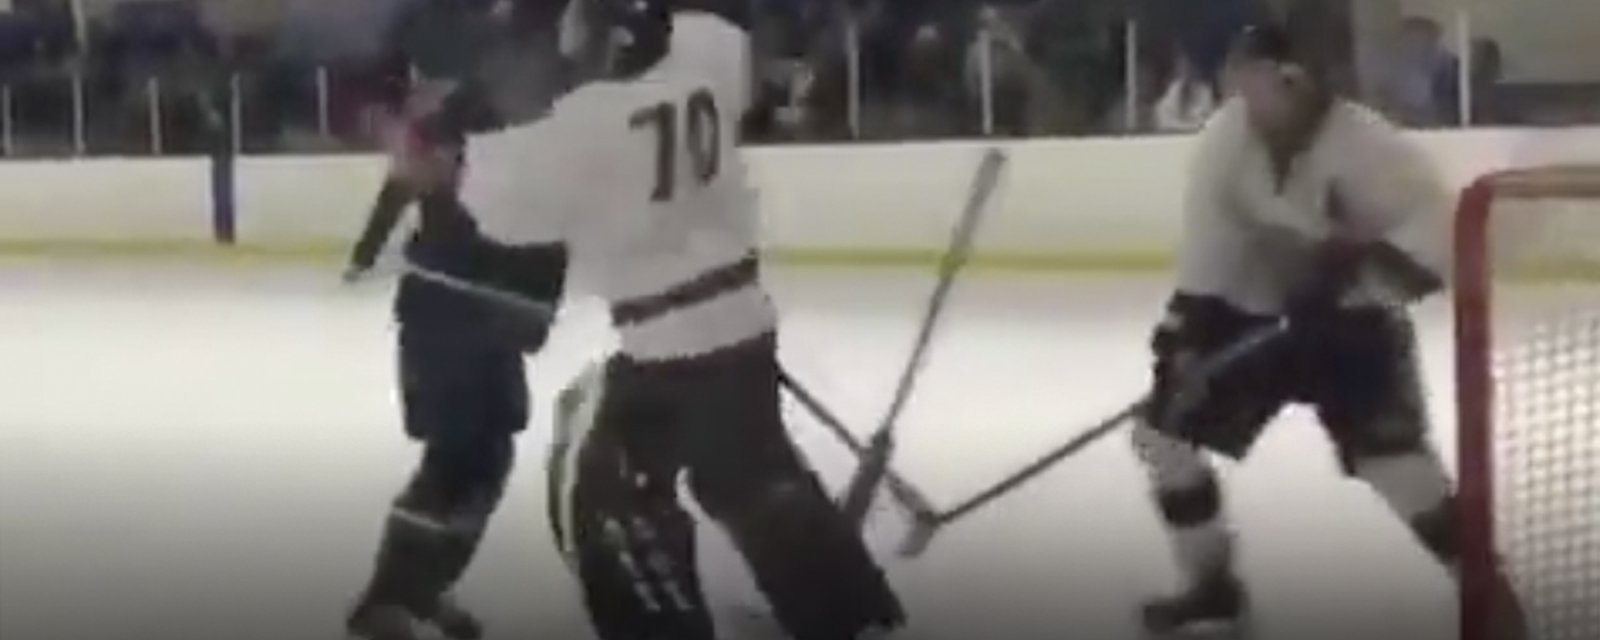 Goalie beats up player who crashed his crease, proceeds to get knocked out cold by charging opponent